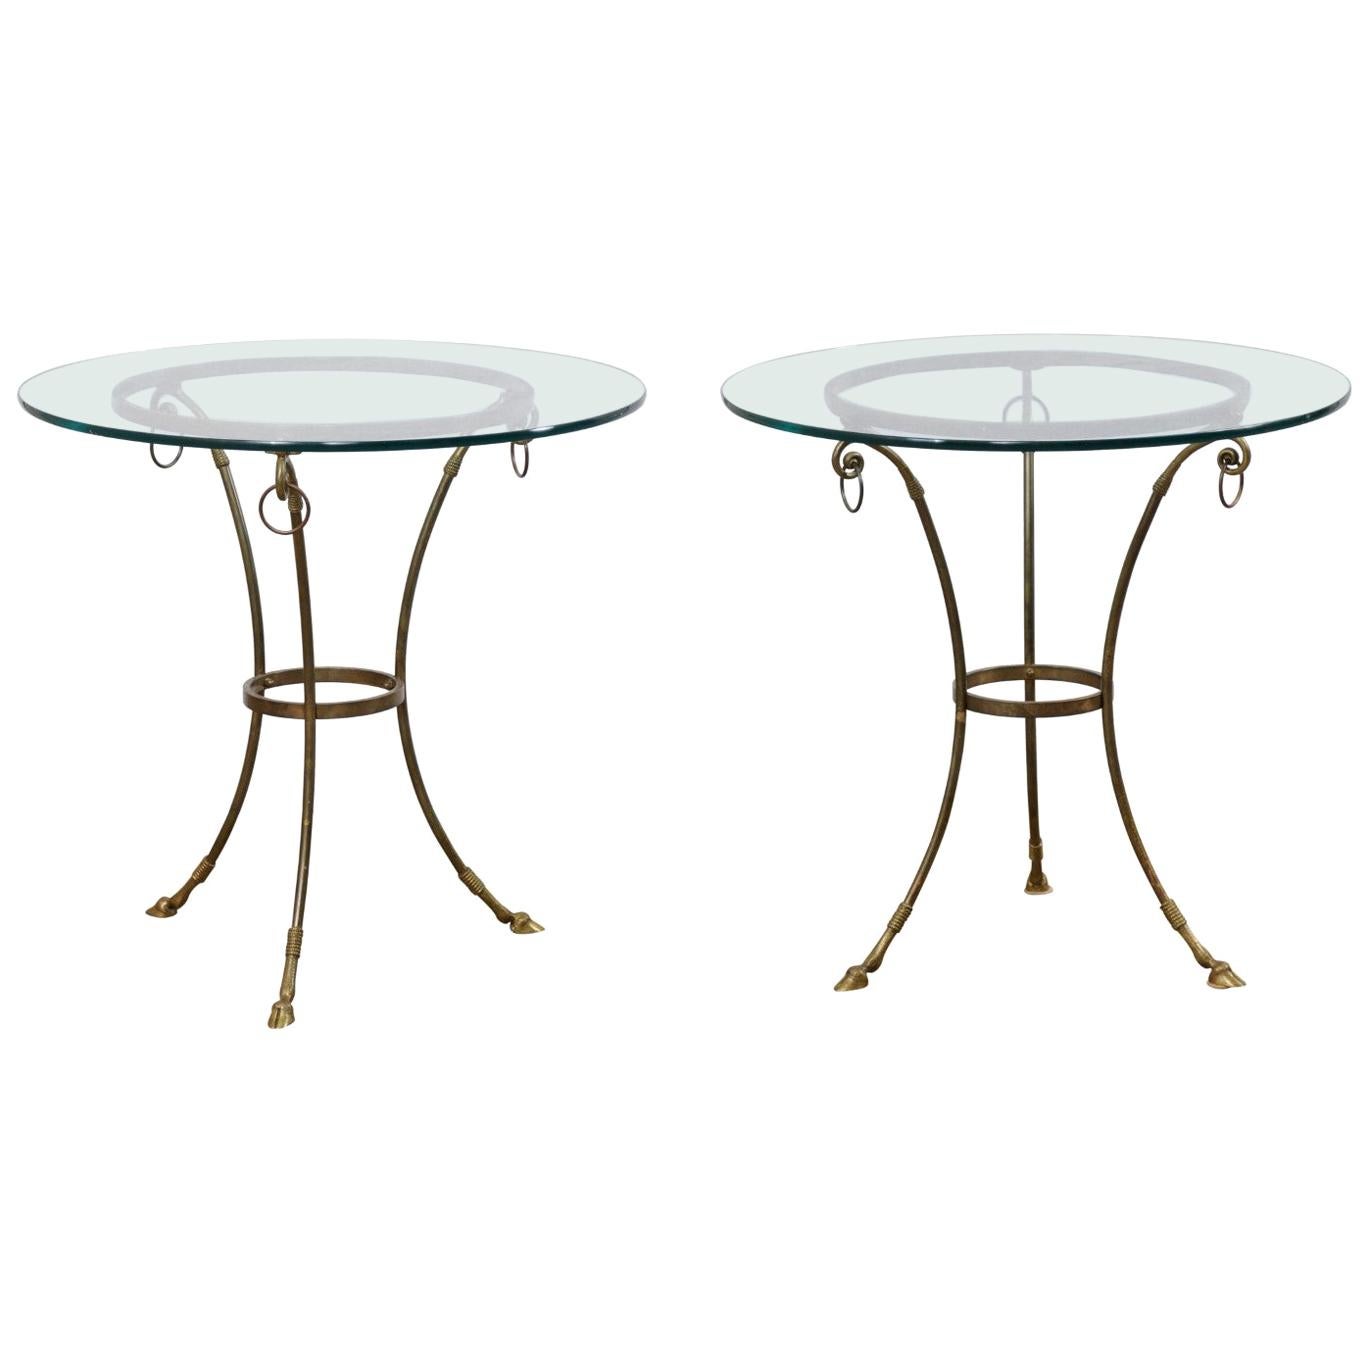 Italian Pair of Round Brass Tables with Hooved Feet and Glass Tops